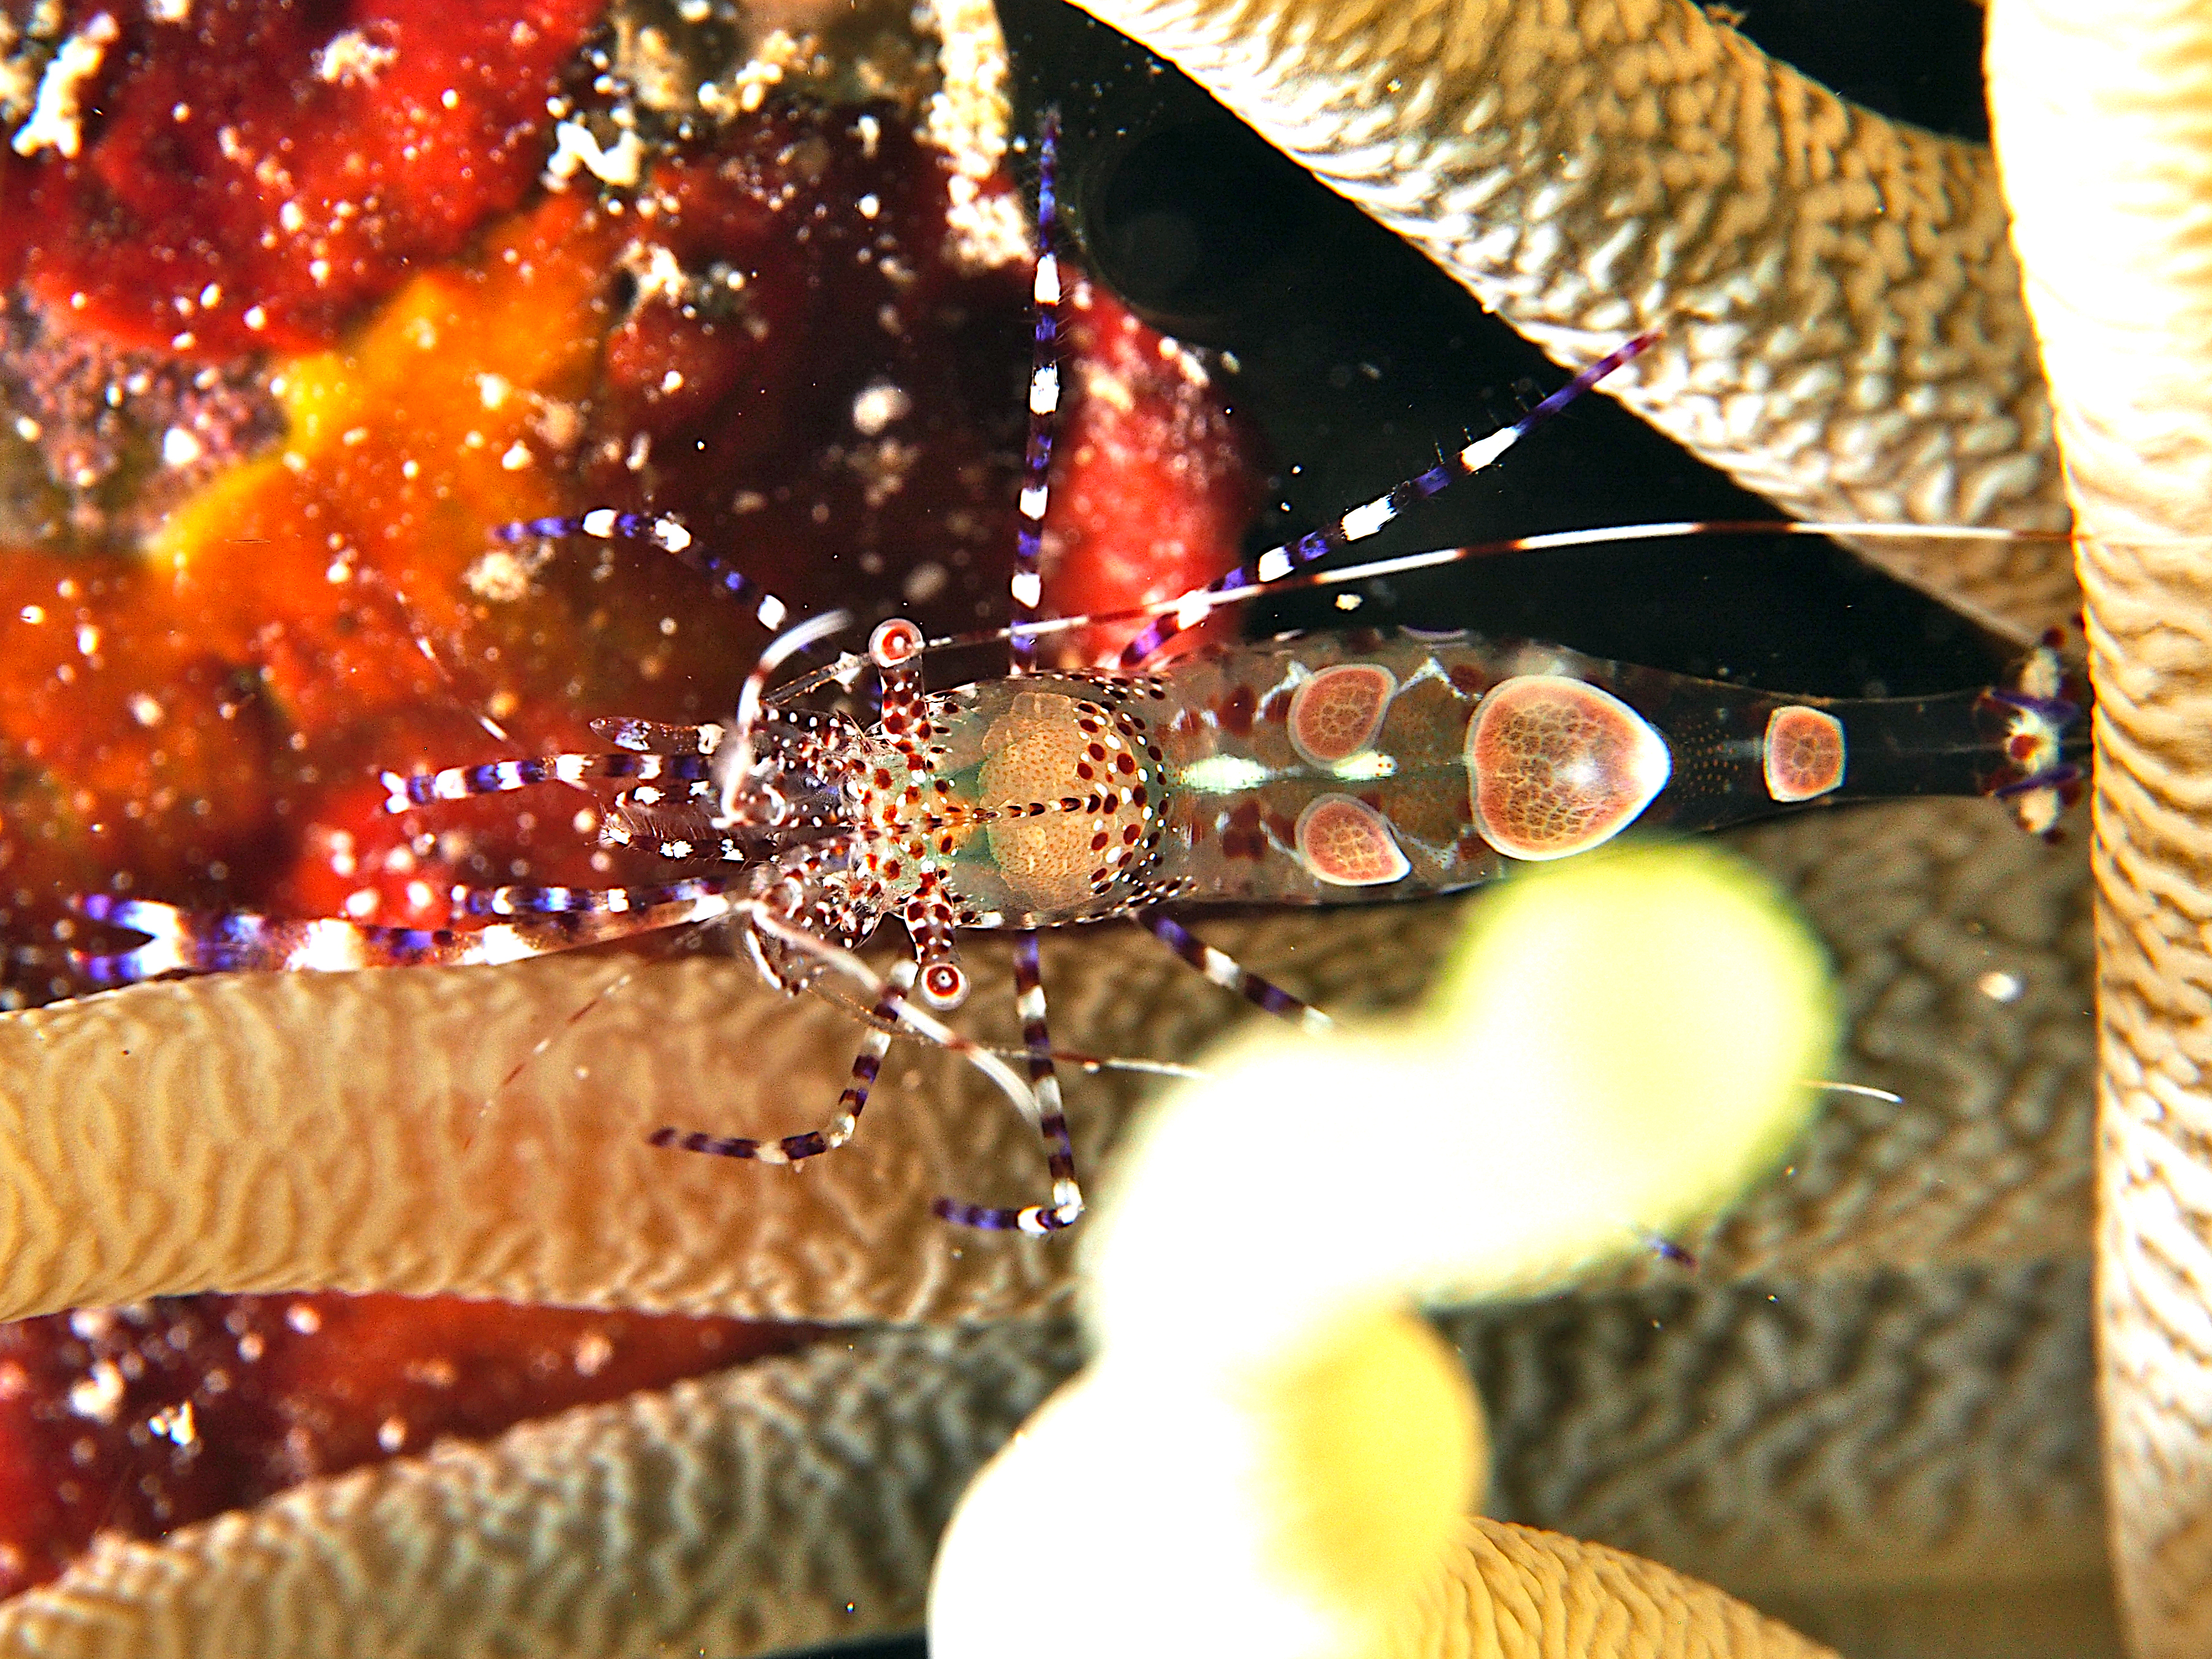 Spotted Cleaner Shrimp - Periclimenes yucatanicus